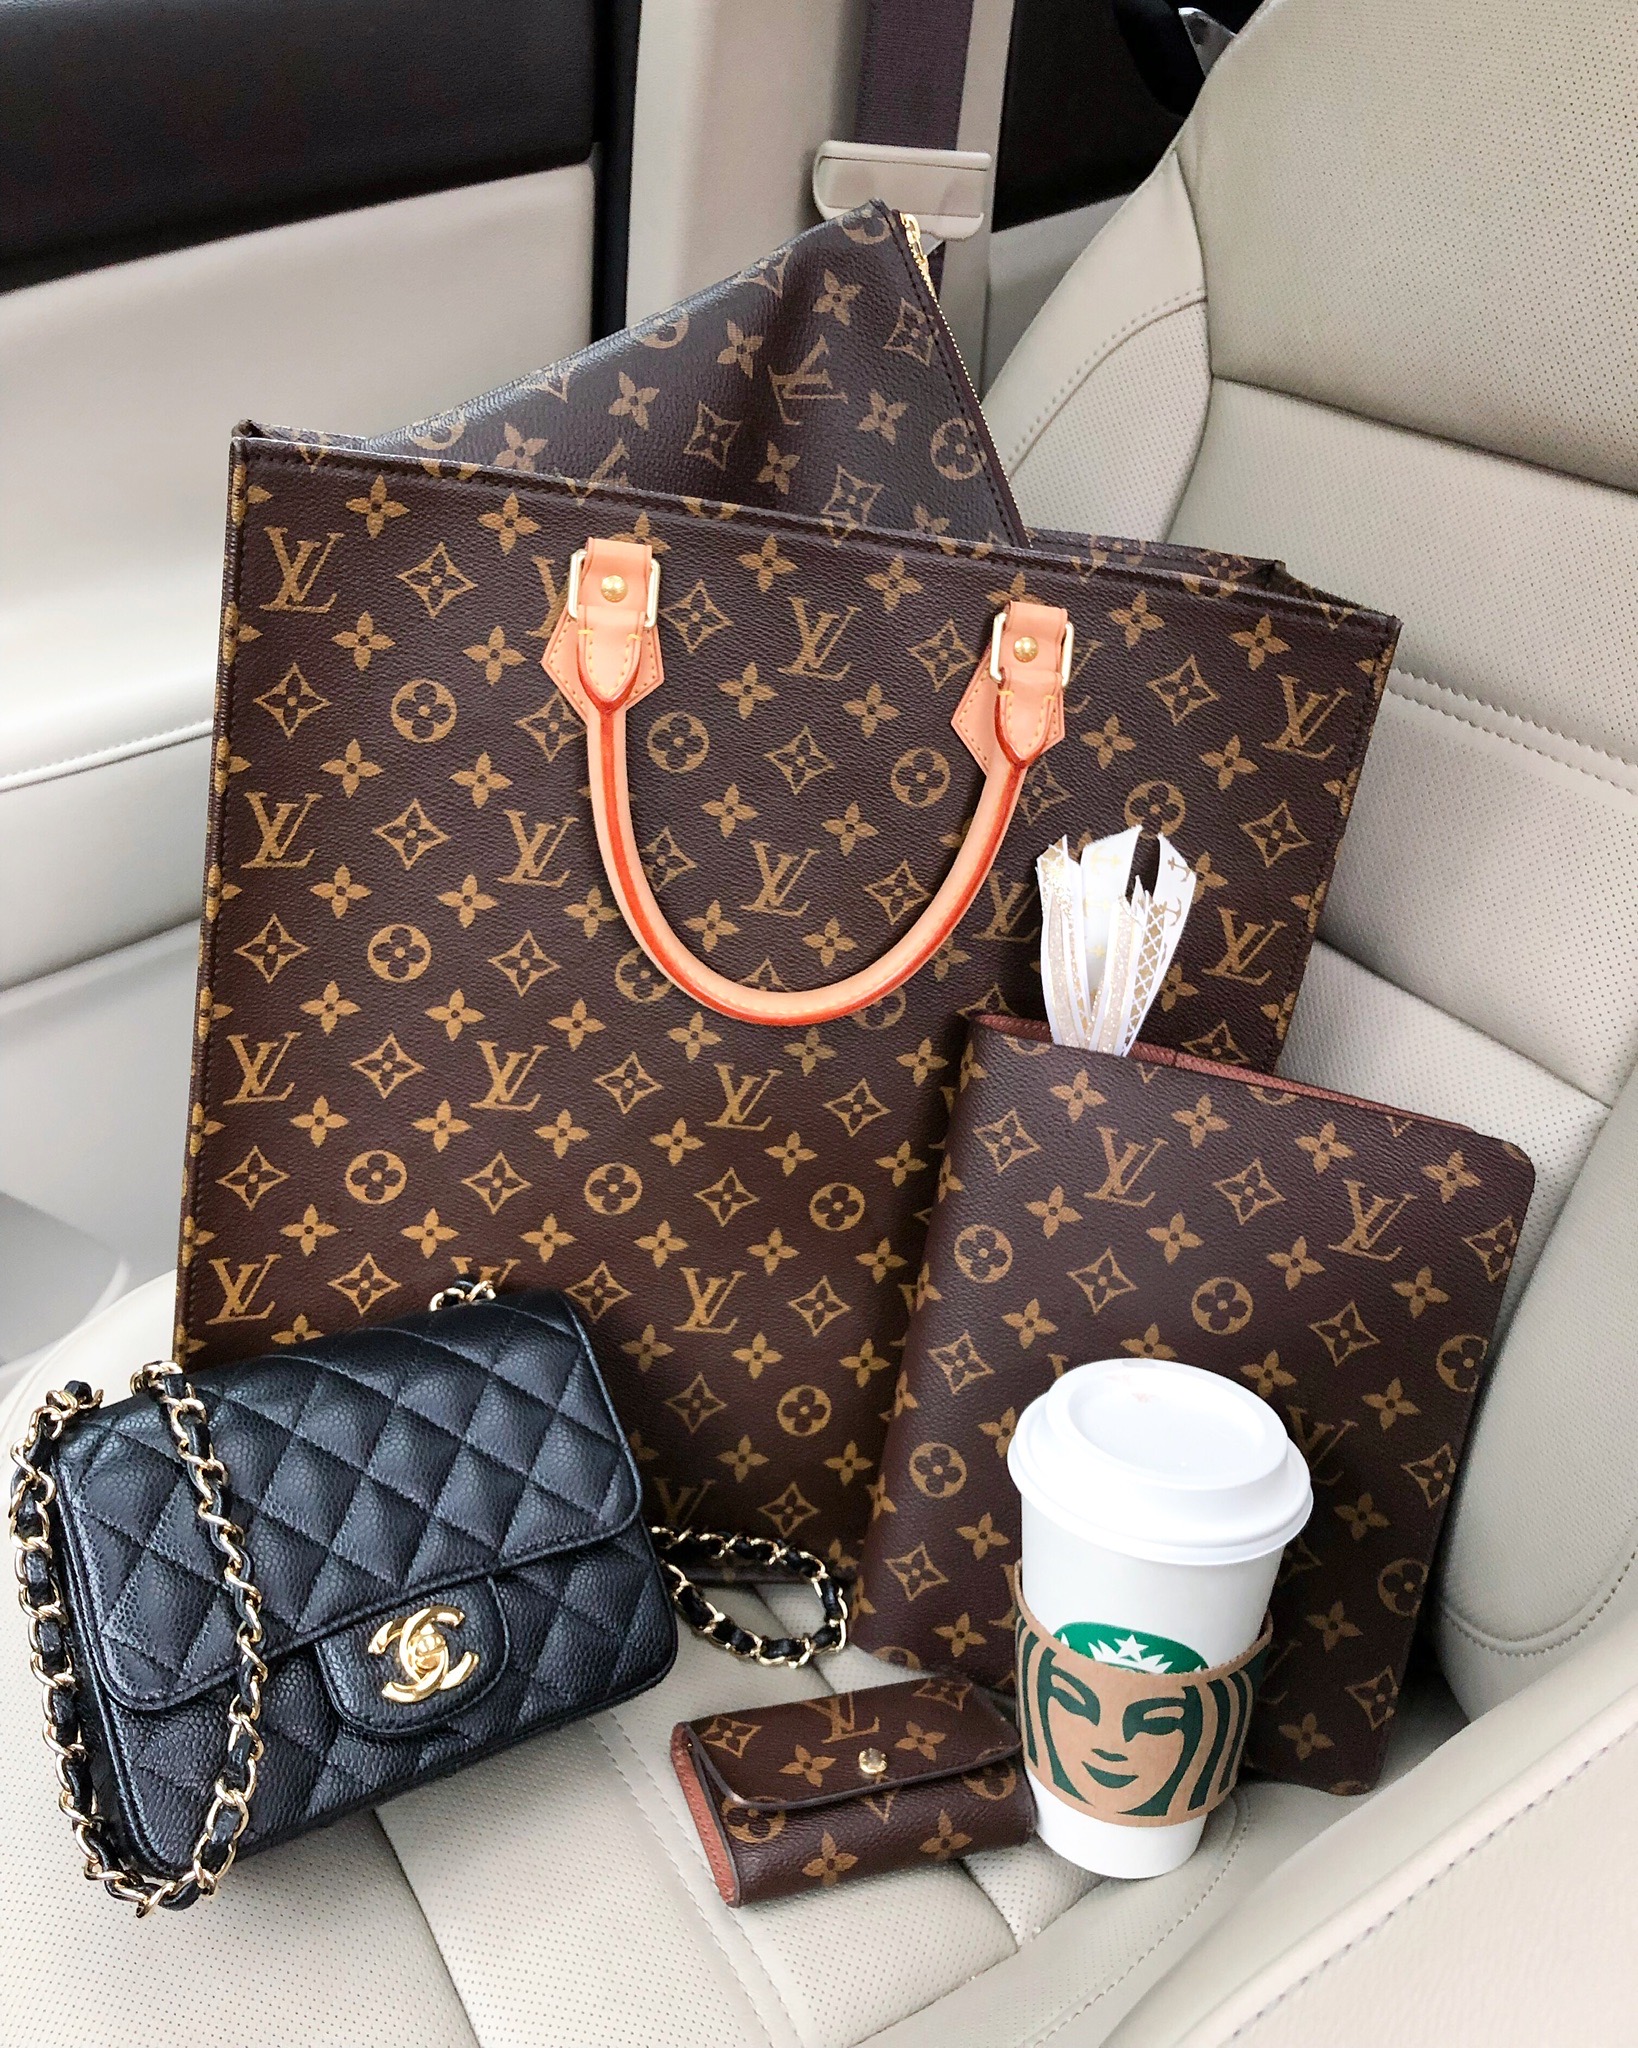 Why Buy Pre-Loved Luxury, LuxMommy